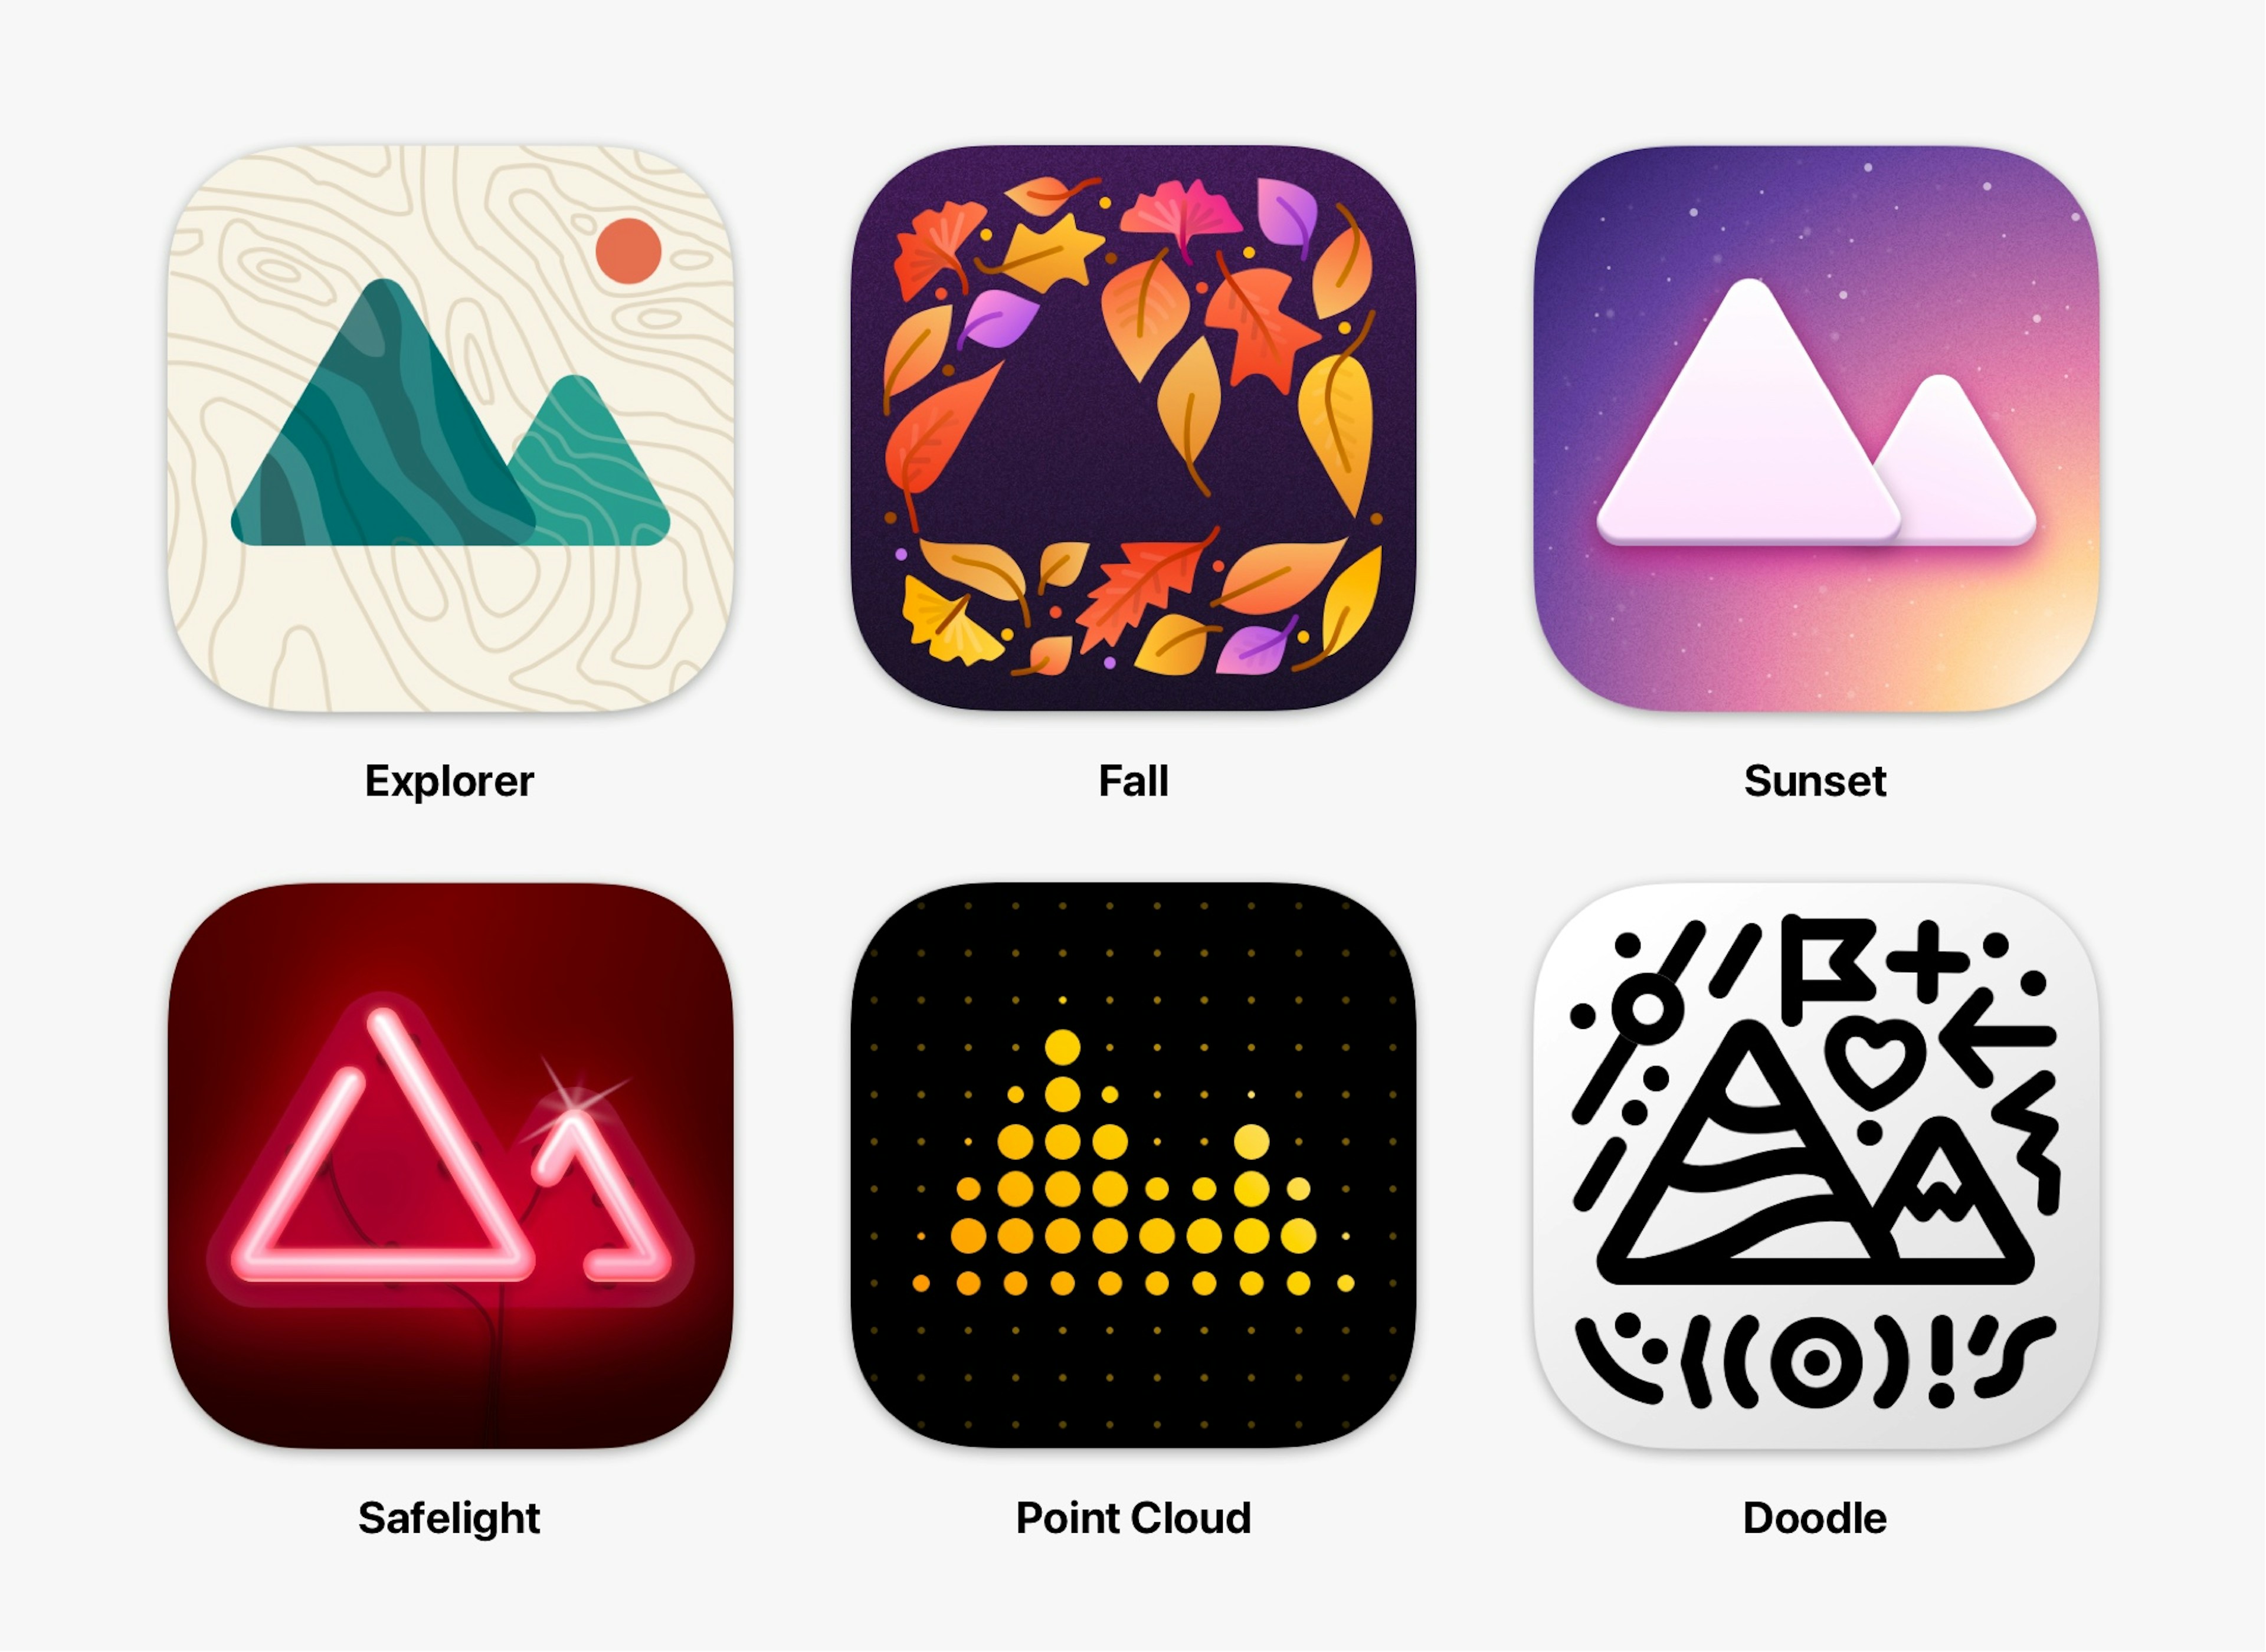 Six new app icons; Explorer, Fall, Sunset, Safelight, Point Cloud, and Doodle